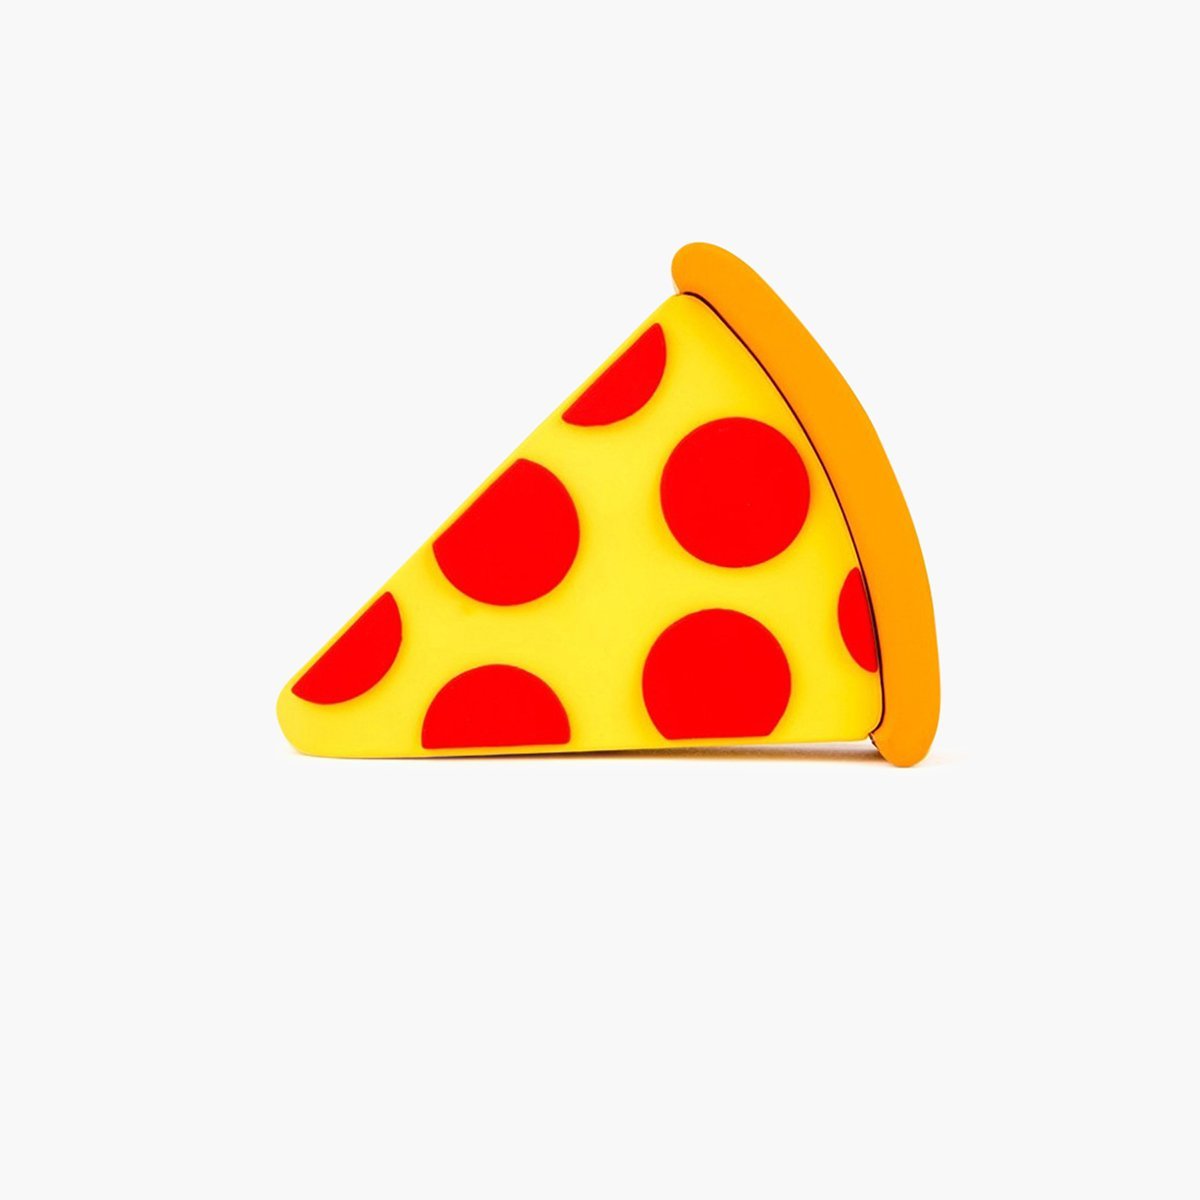 MOJIPOWER pizza 2-MJPCHRALL-025016-Multi-One Size-SUEDE Store